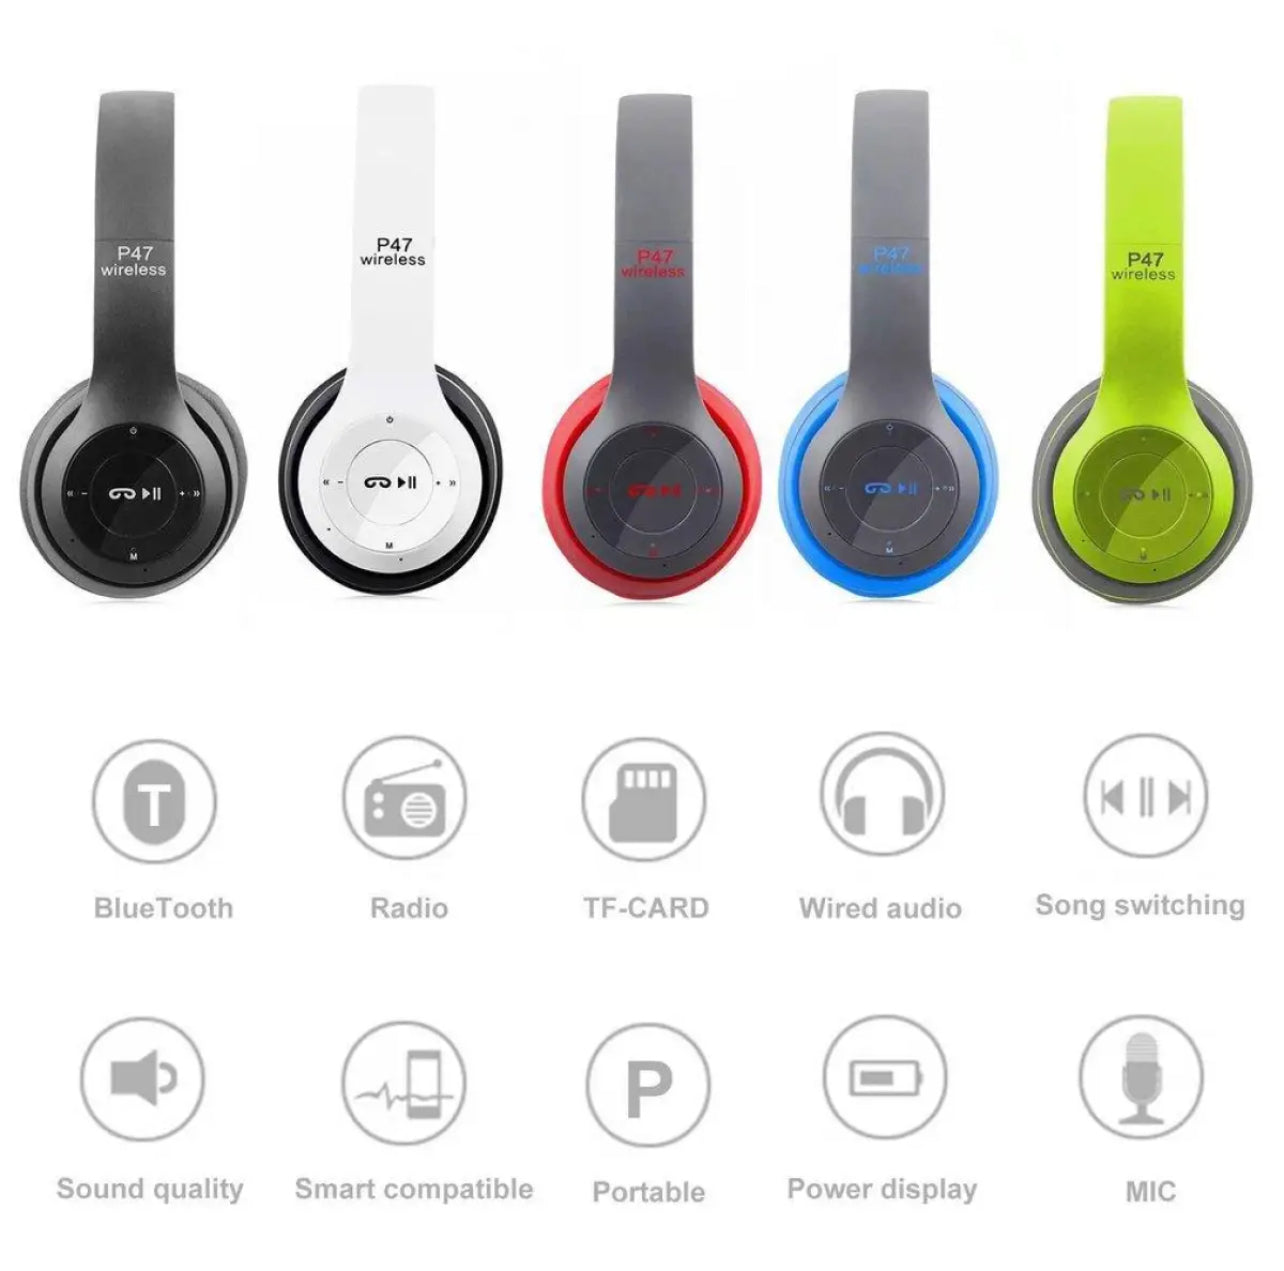 P47 Wireless headphones with Microphone Bluetooth Foldable Headset